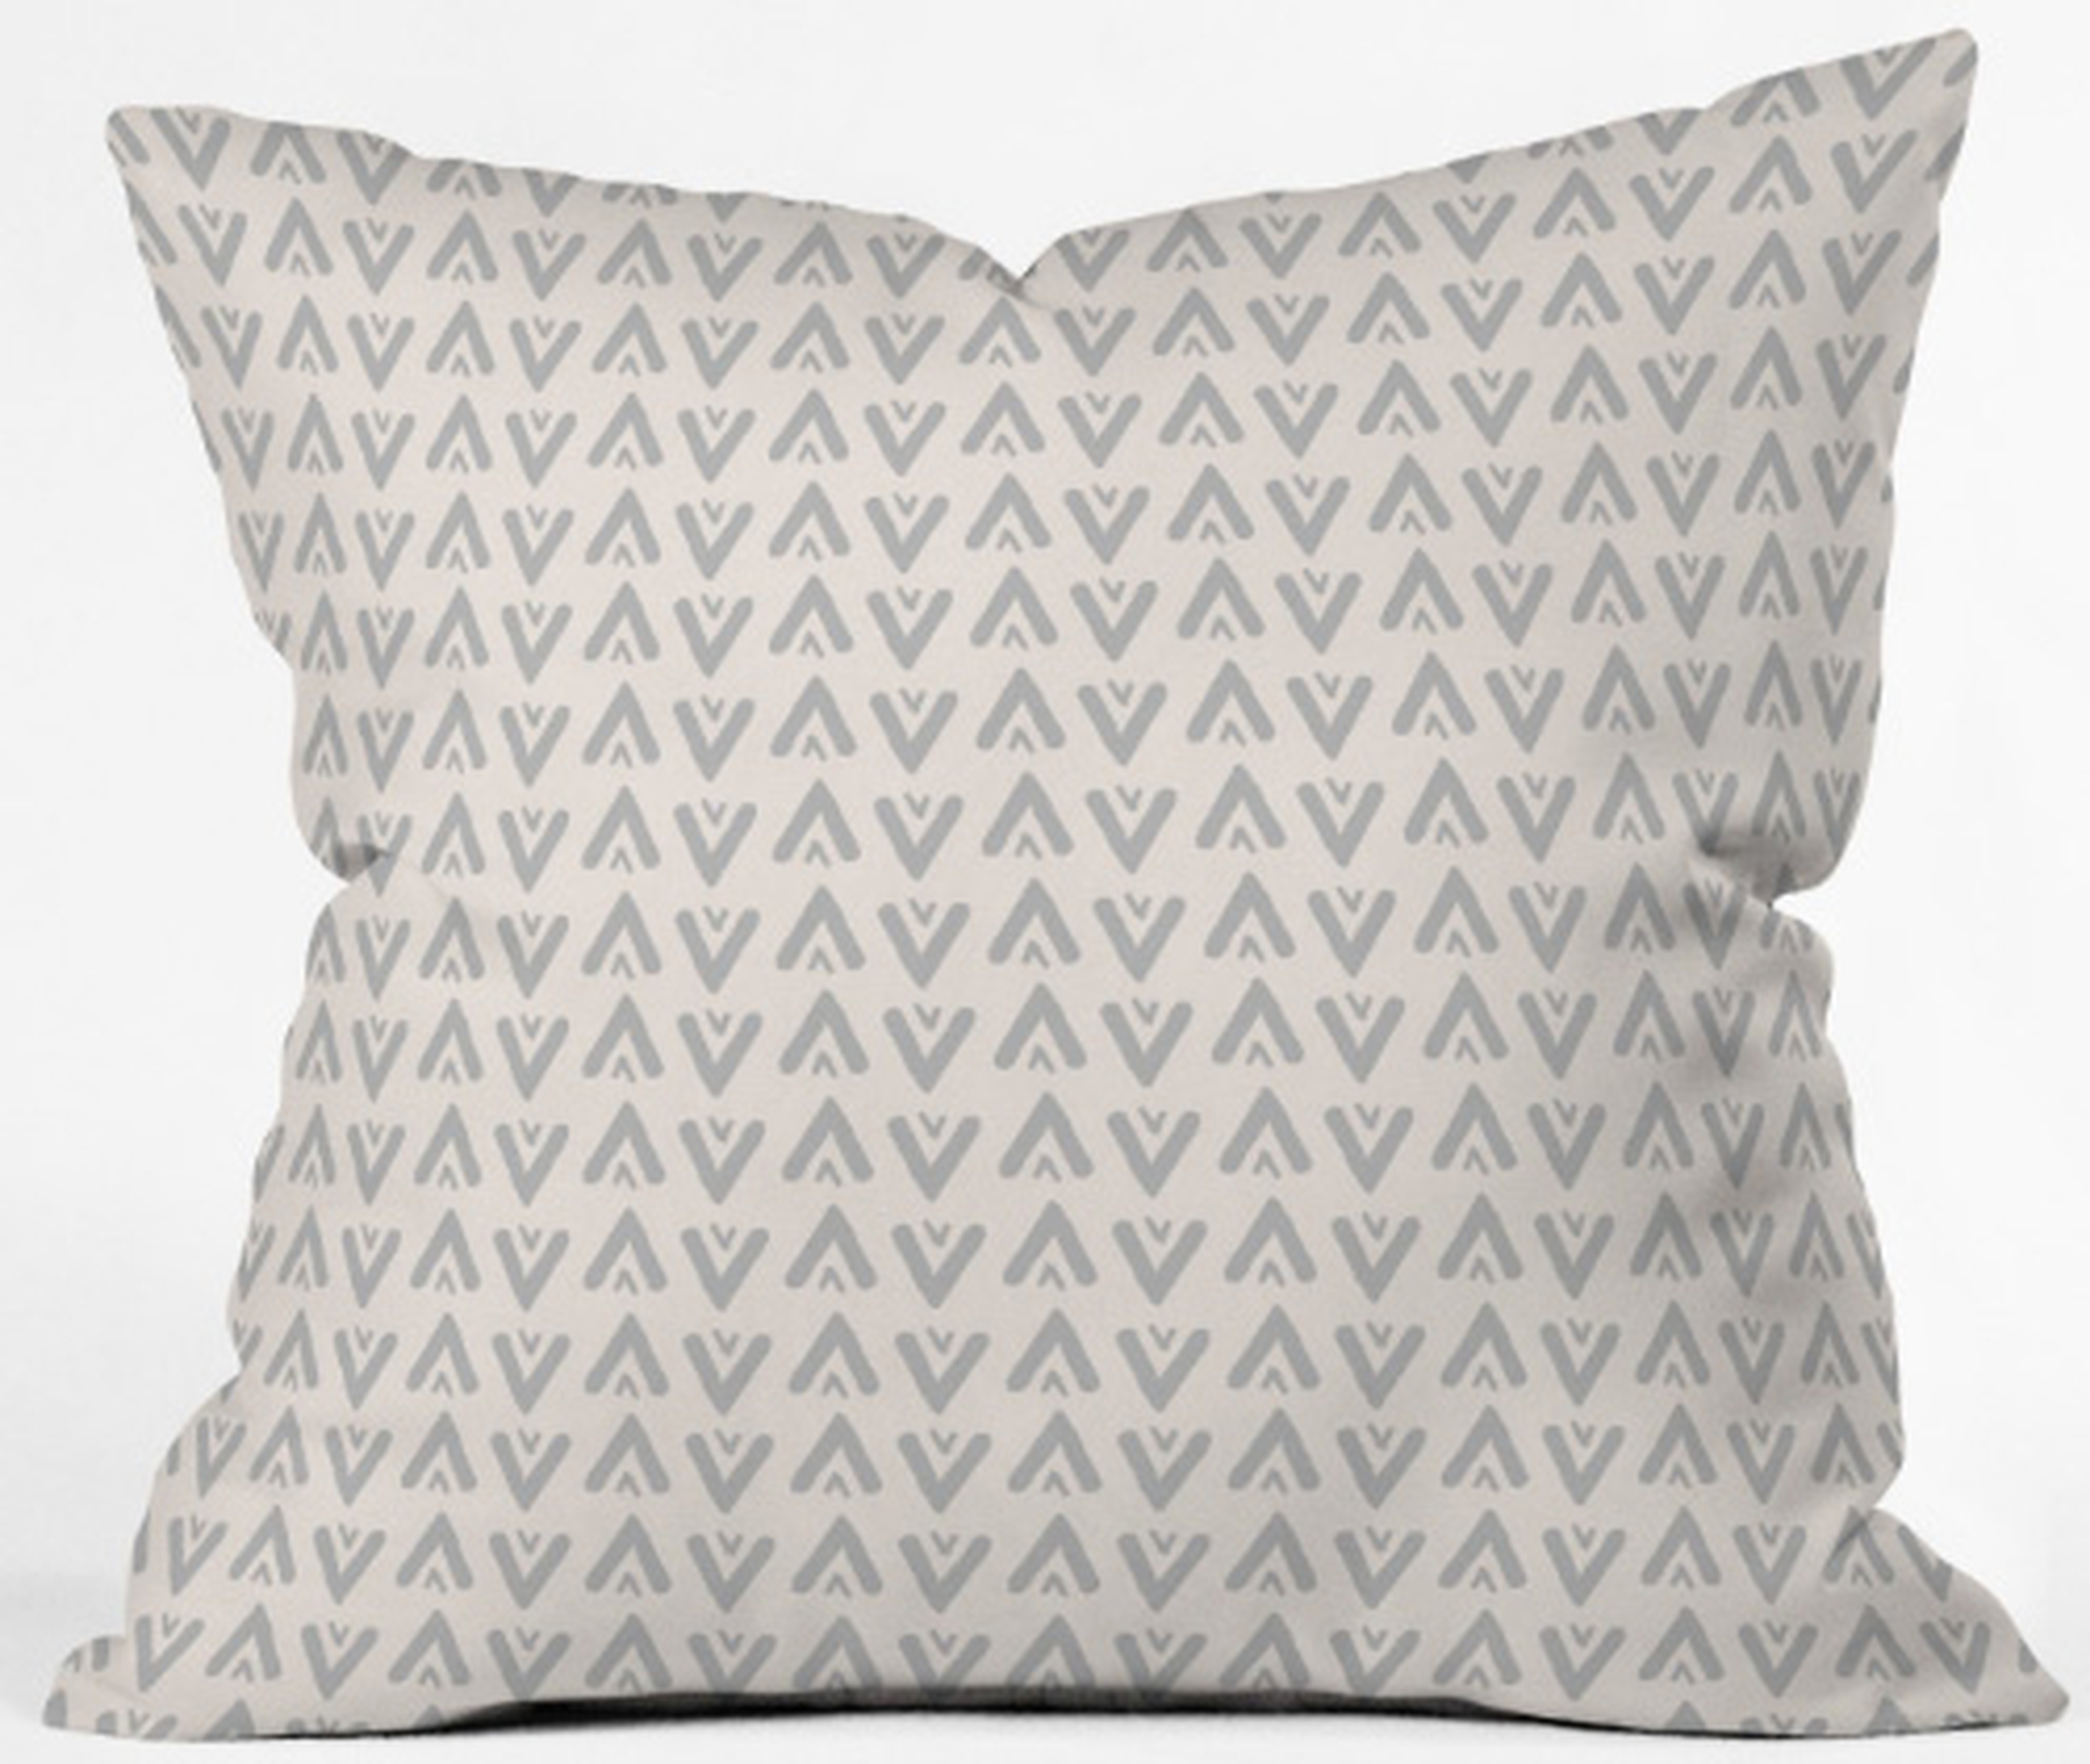 Grey arrows Throw Pillow - 20"x20" cover only - Wander Print Co.